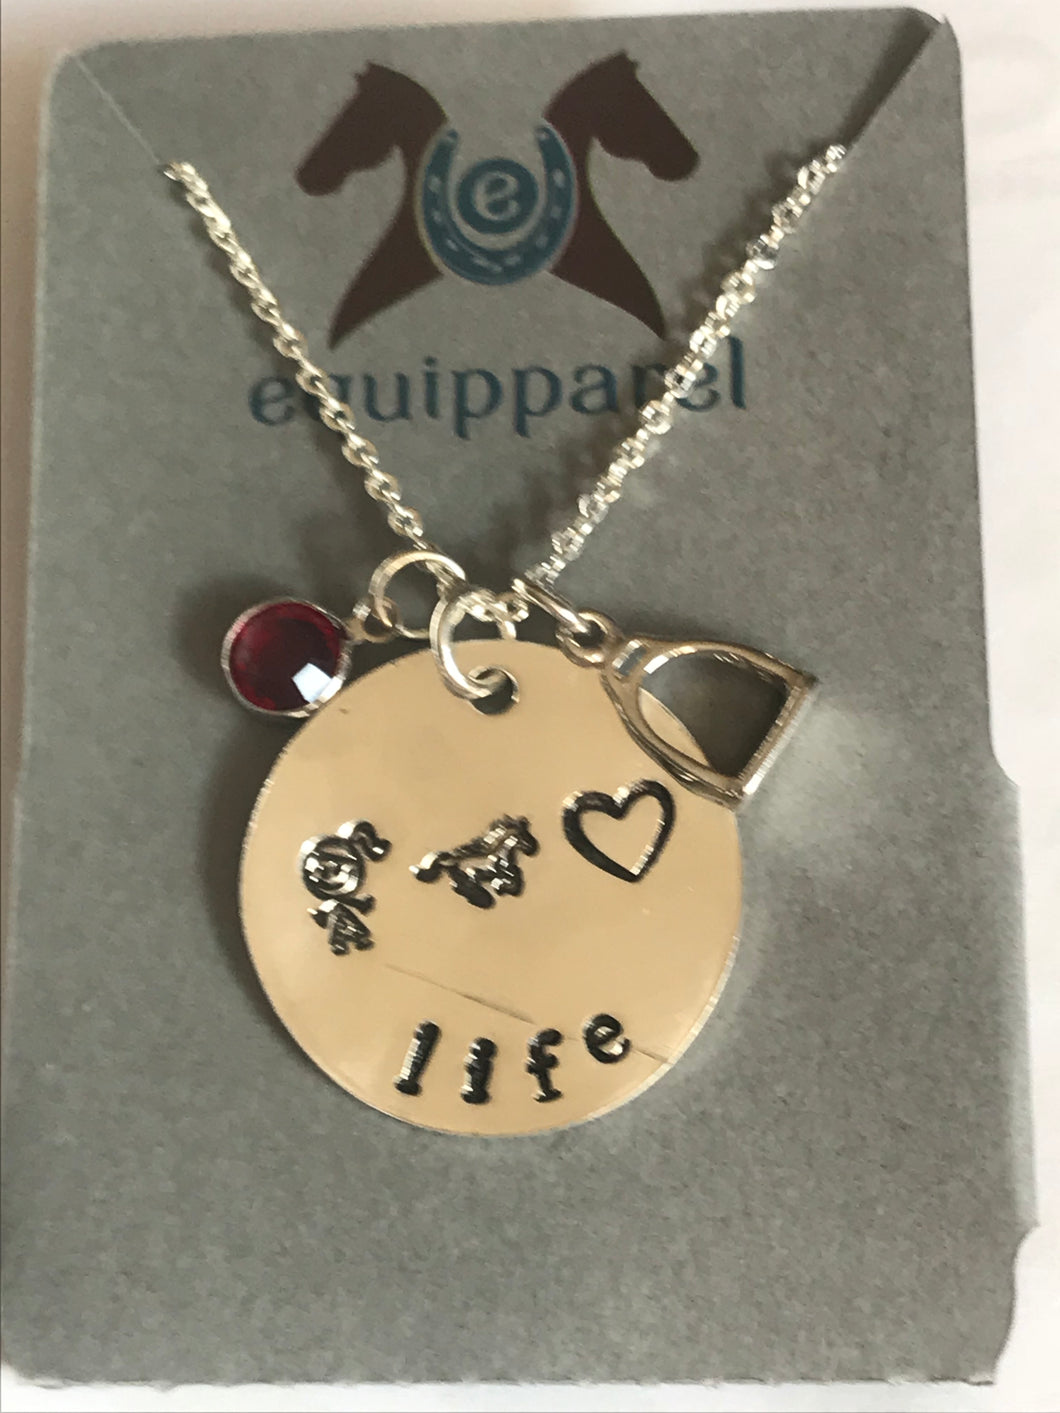 Life Sterling Silver Necklace with Stirrup Charm